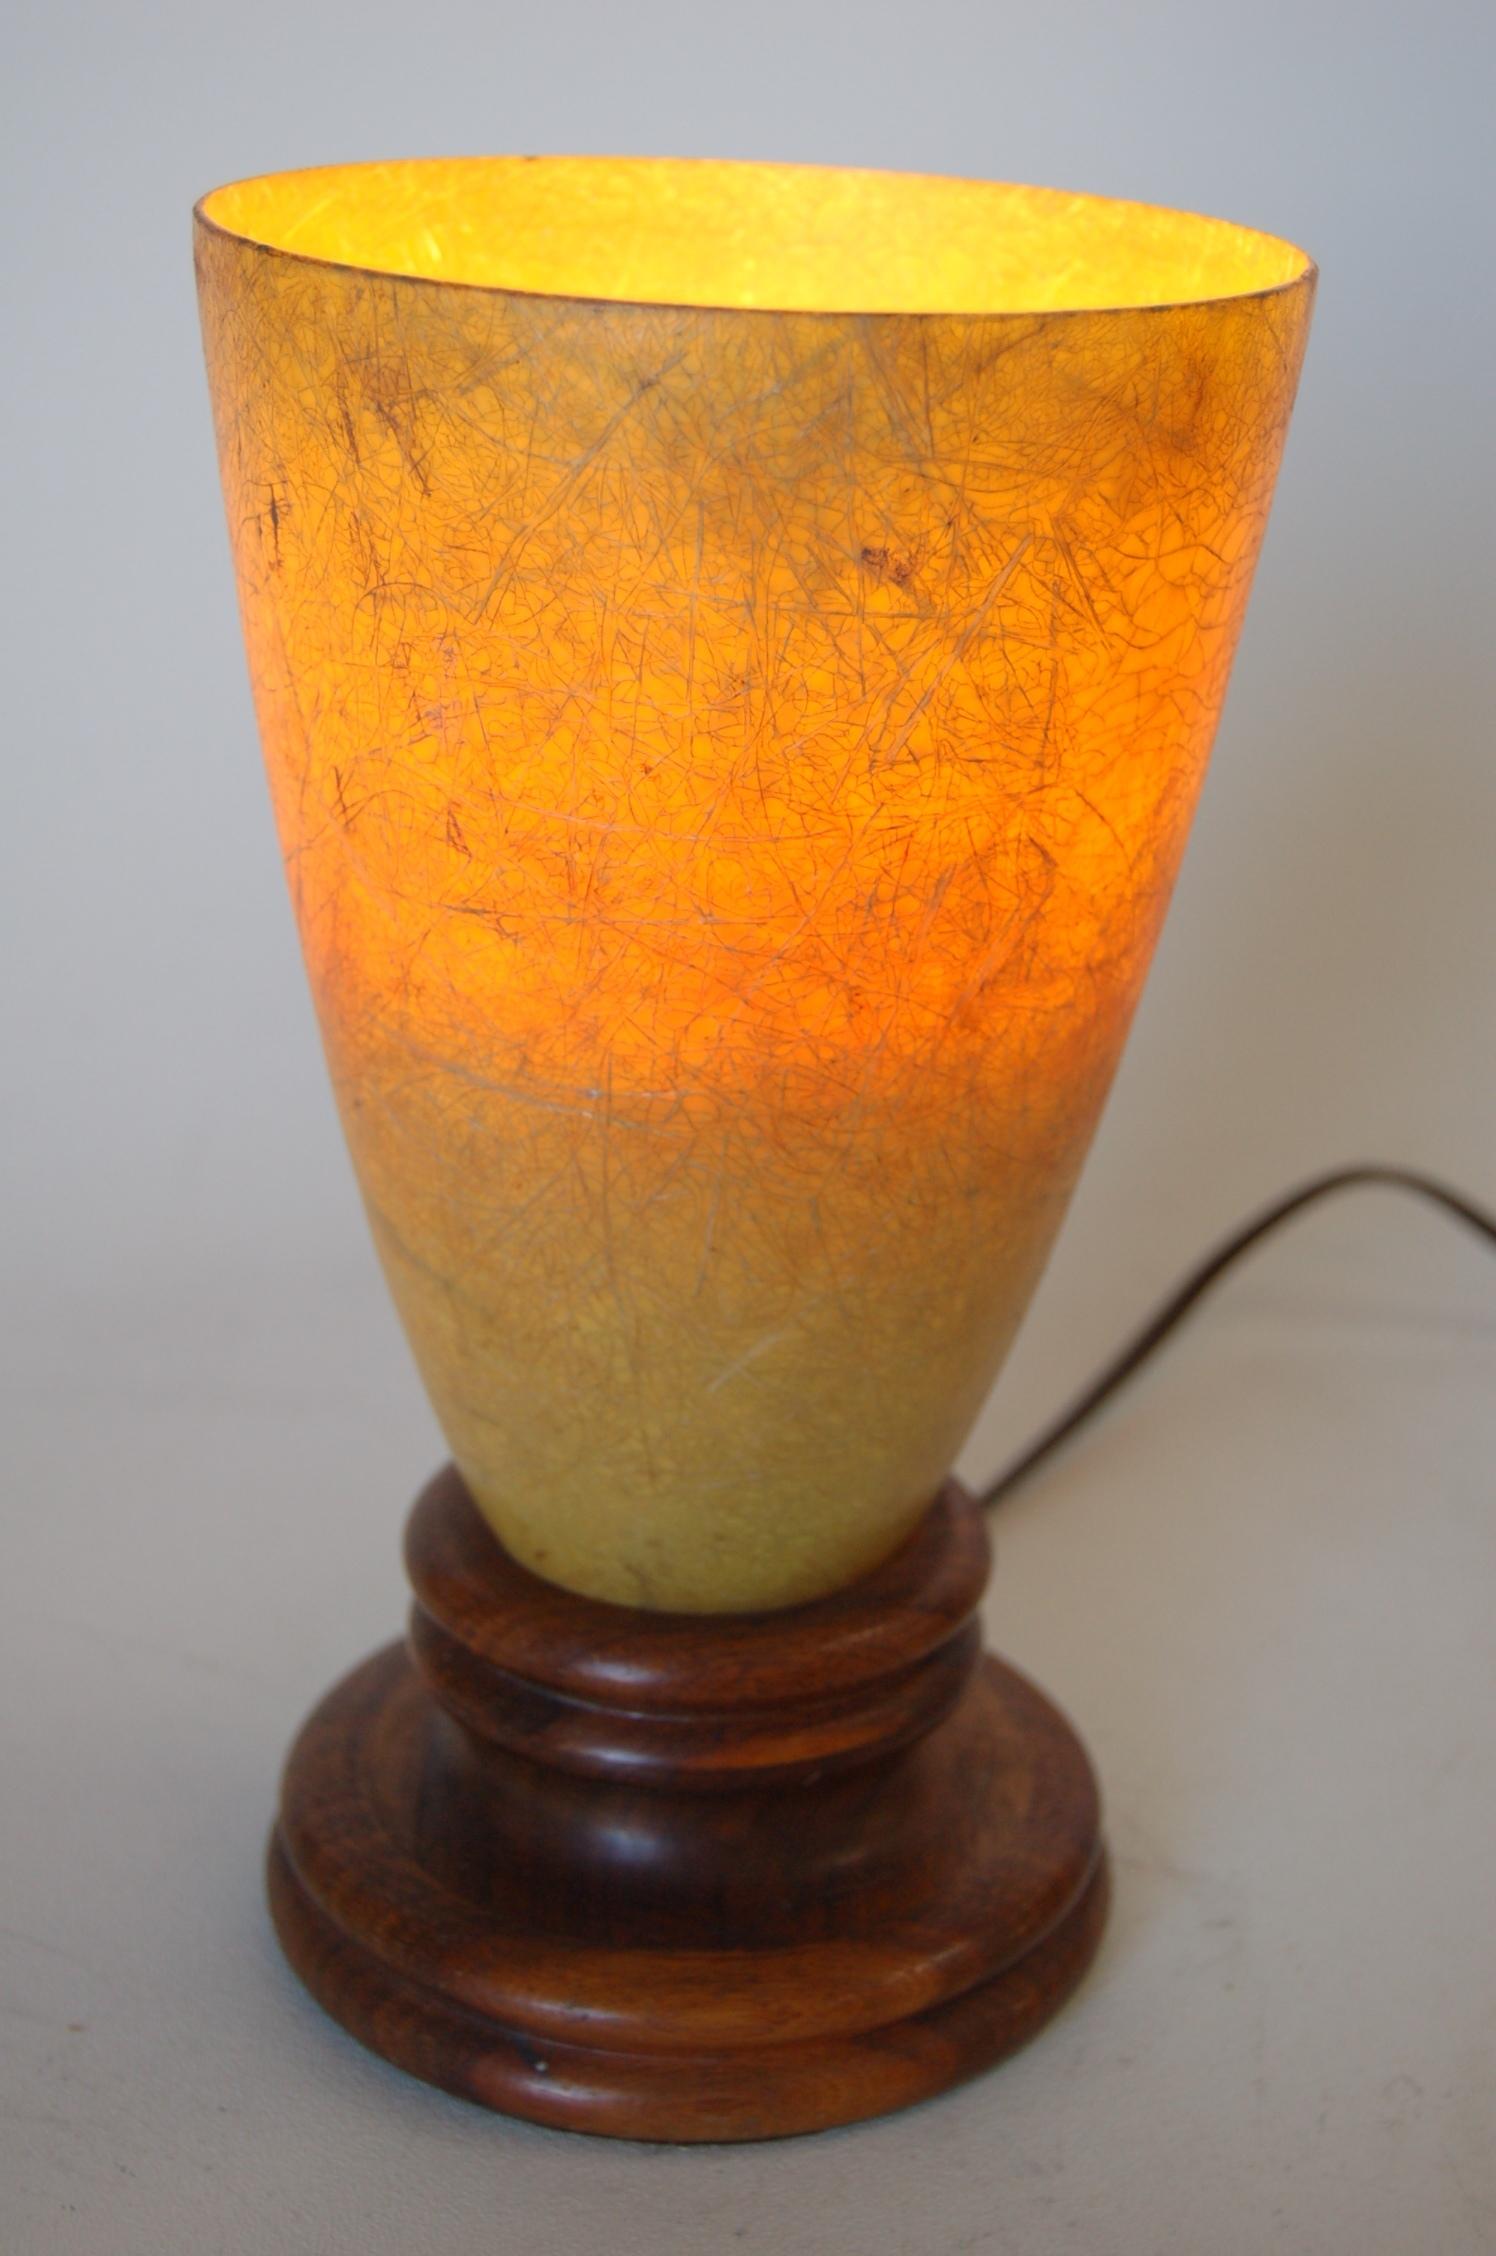 Fiberglass Torchiere Table Lamp with Wood Base In Excellent Condition For Sale In Van Nuys, CA